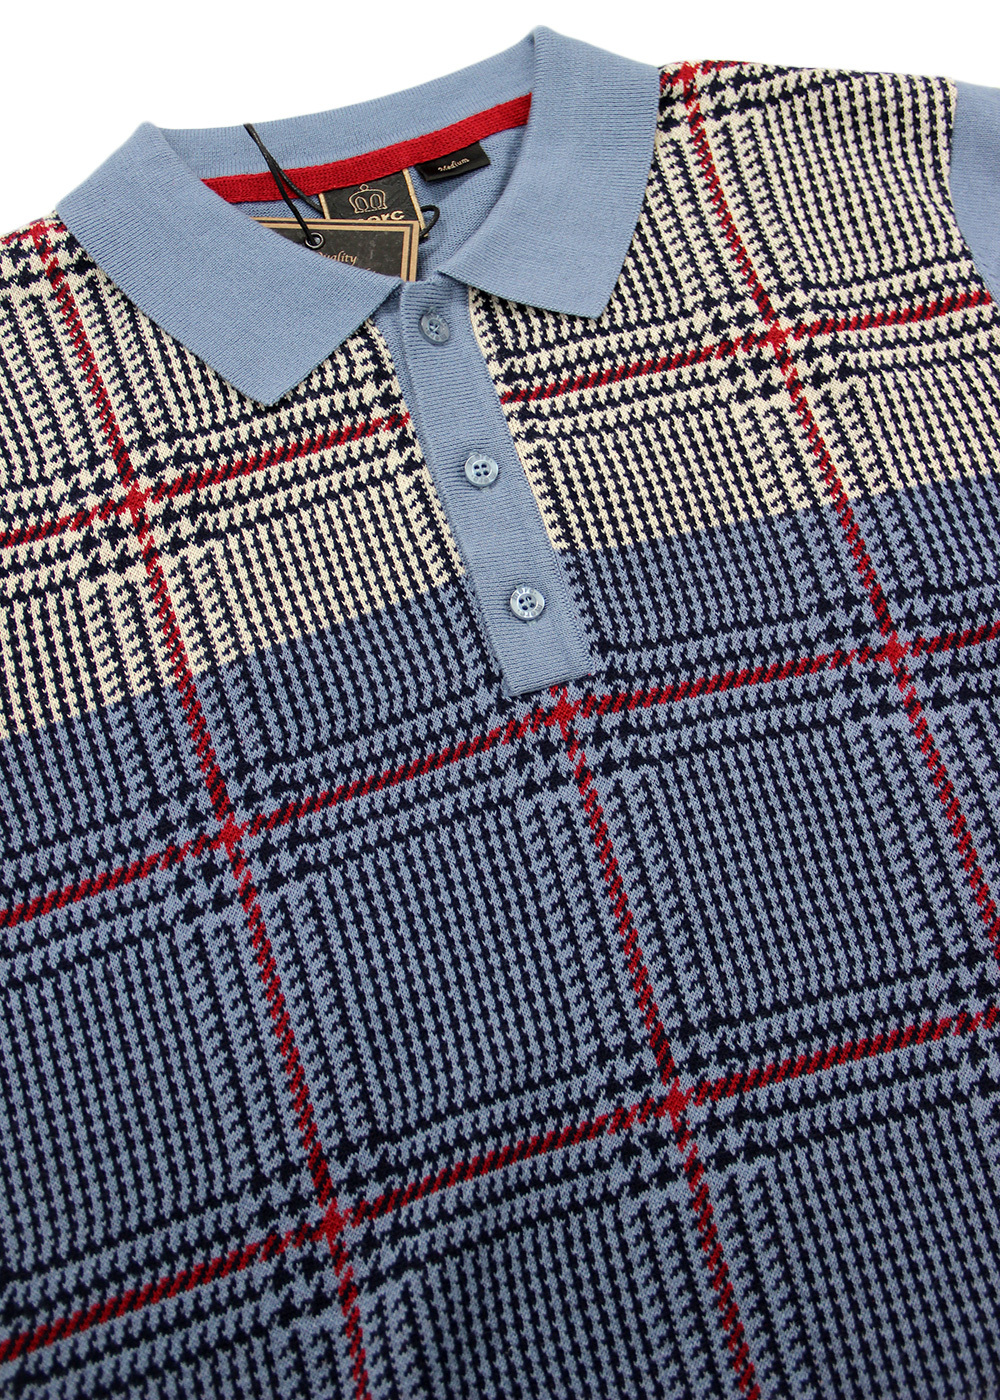 MERC Tetley 1960s Prince Of Wales Check Knit Polo in Vintage Blue